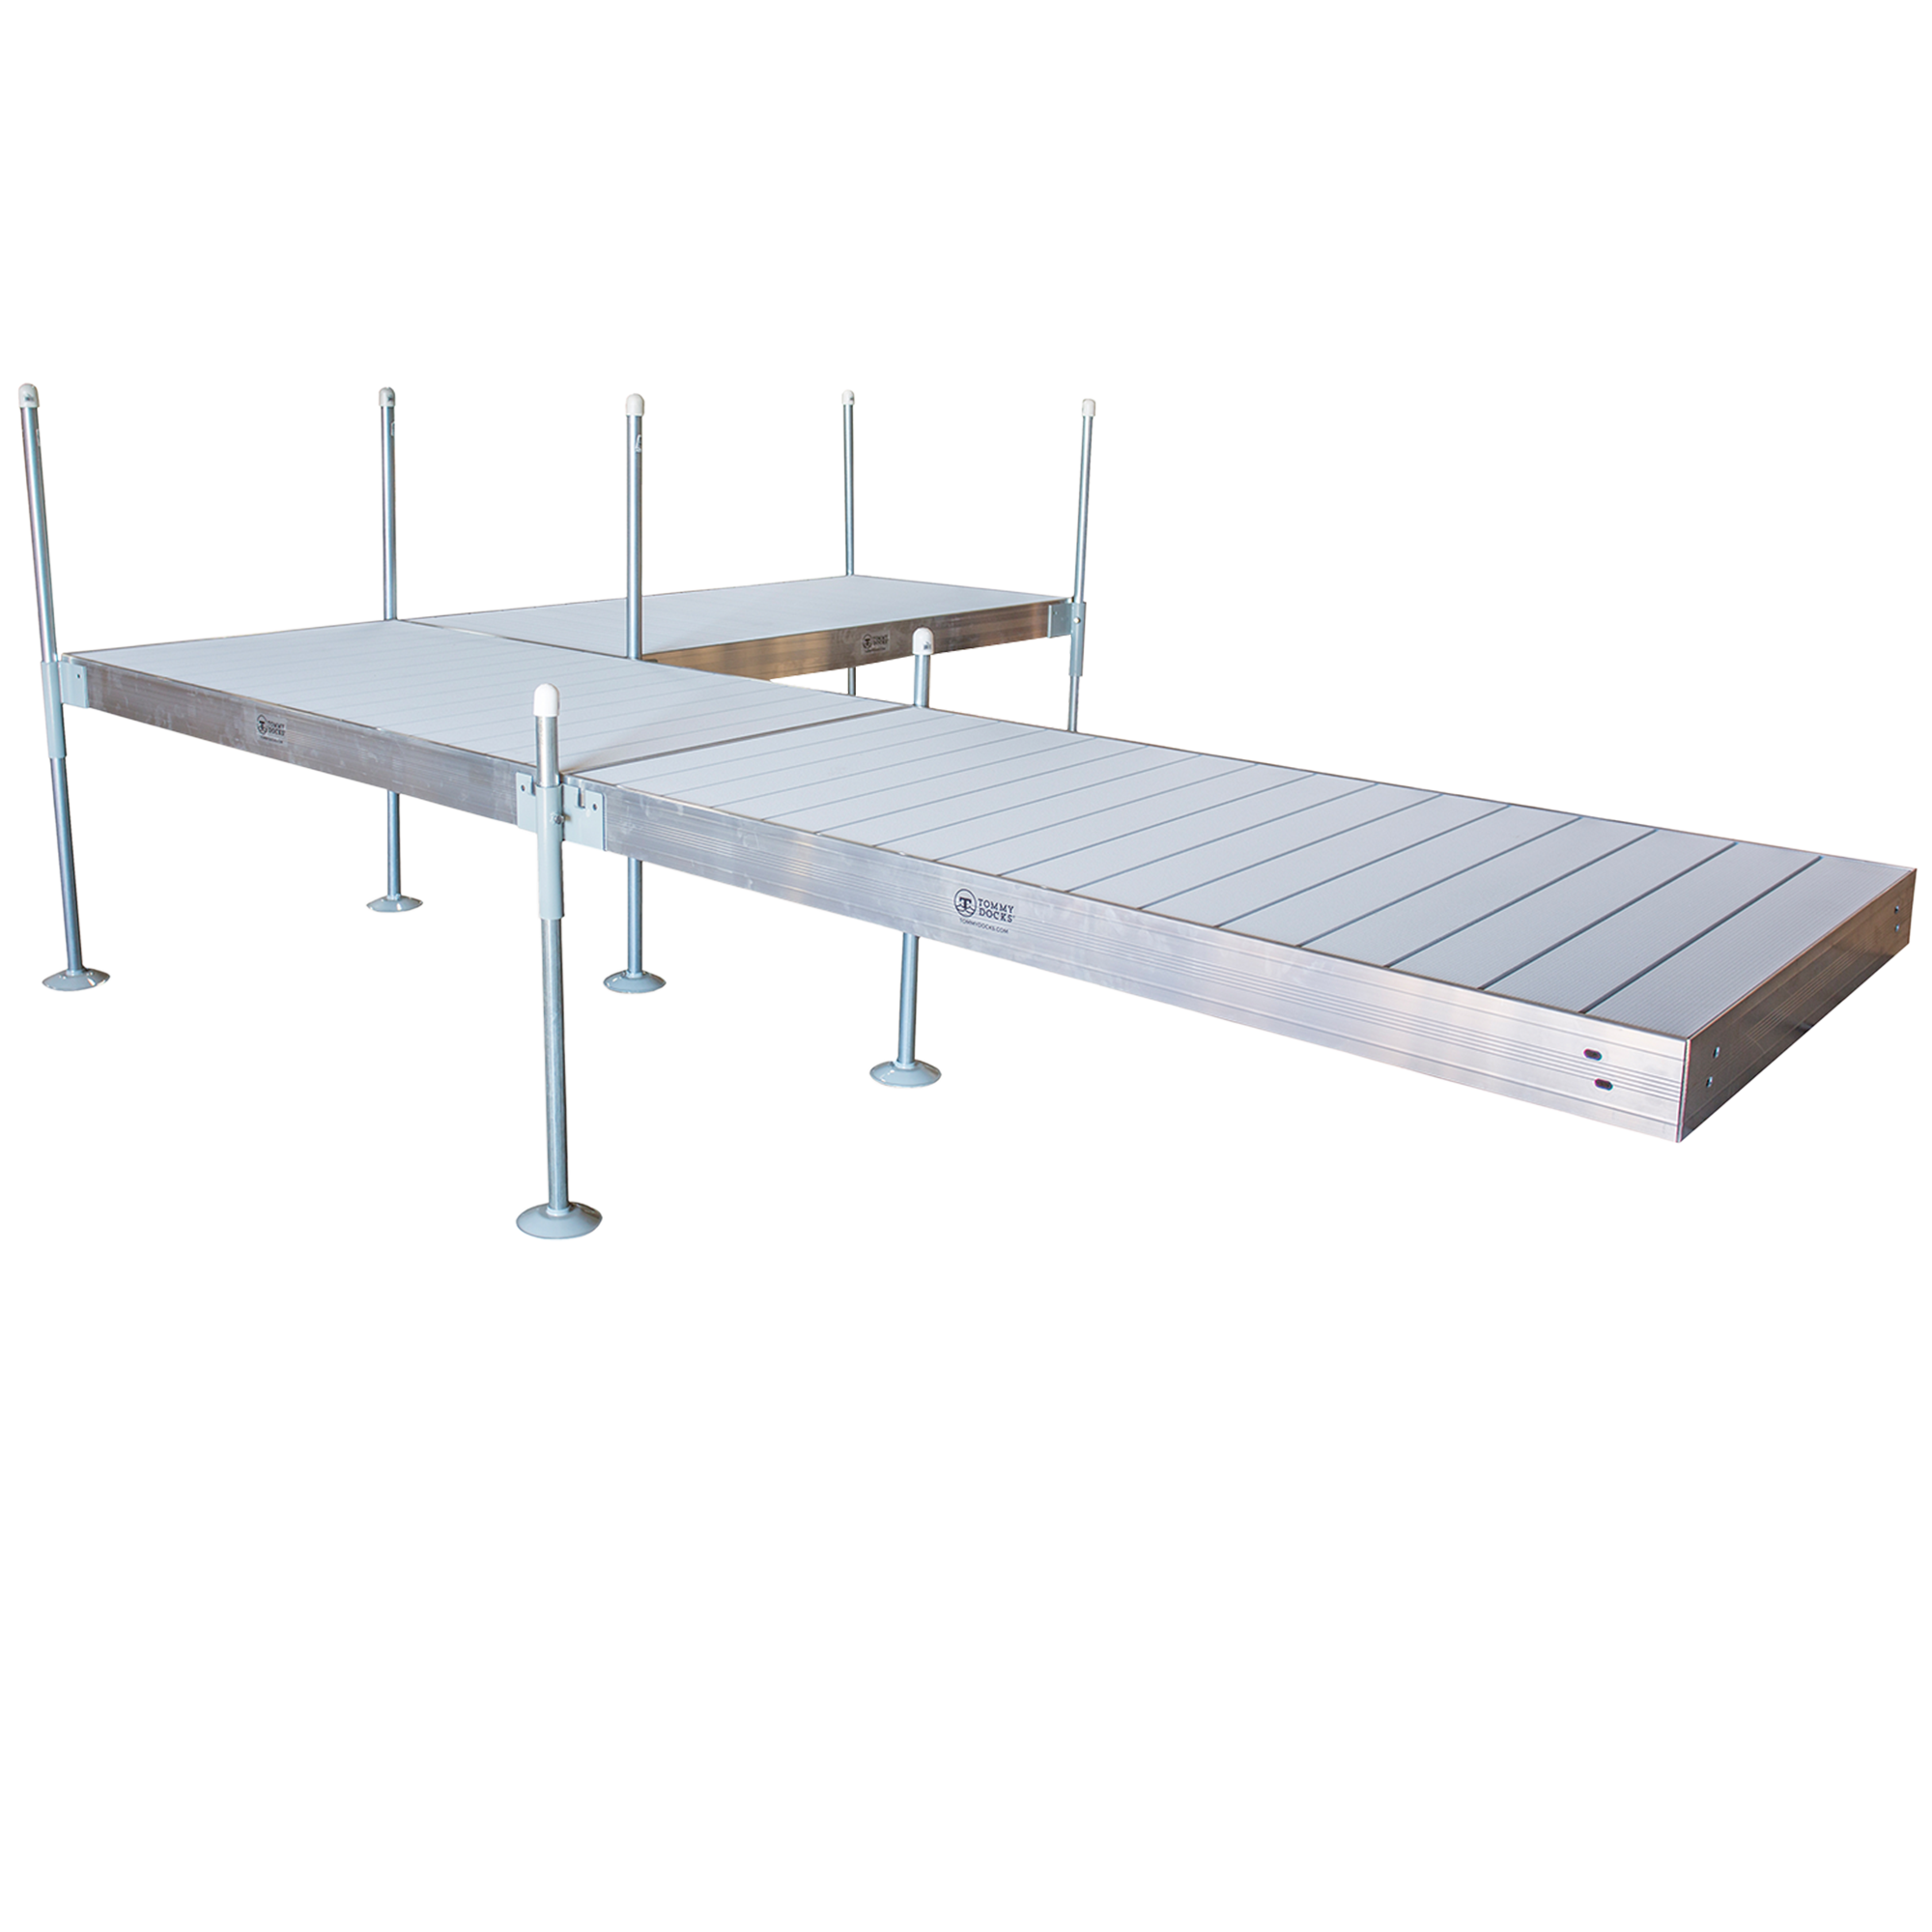 16’ L-Shaped Boat Dock System with Aluminum Frame and Aluminum Decking